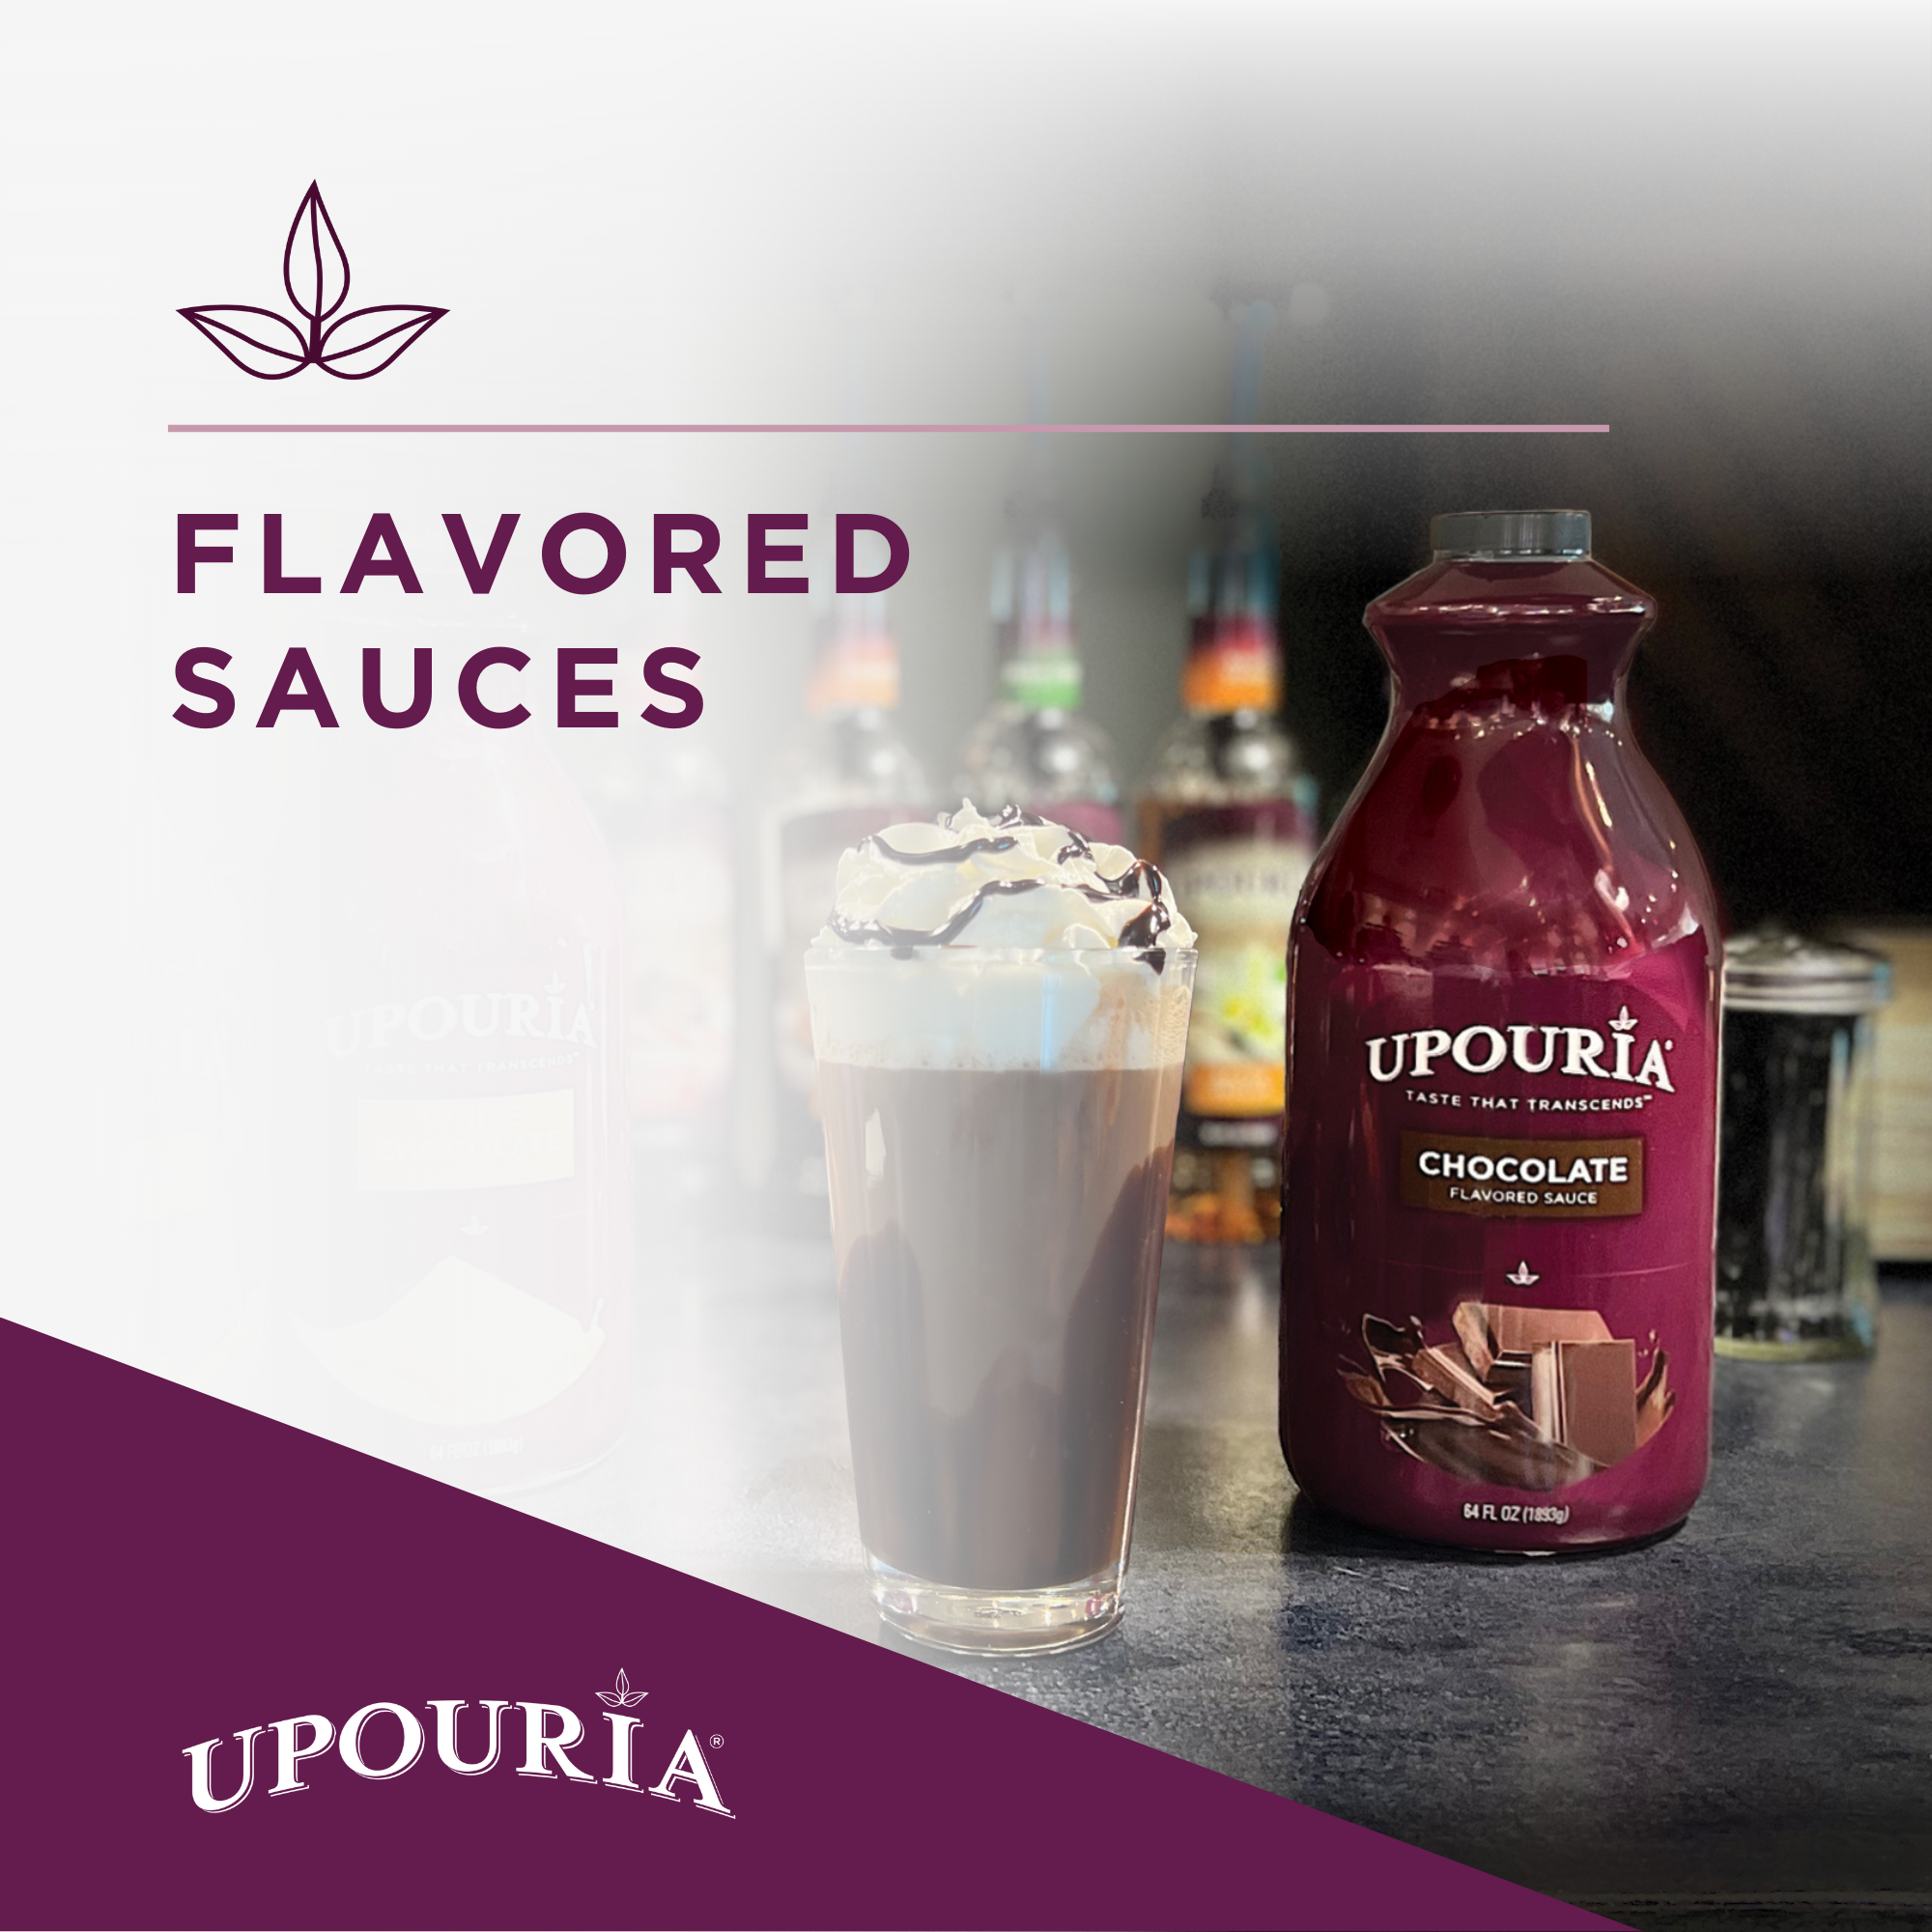 Upouria Flavored Sauces Featured Image 2022